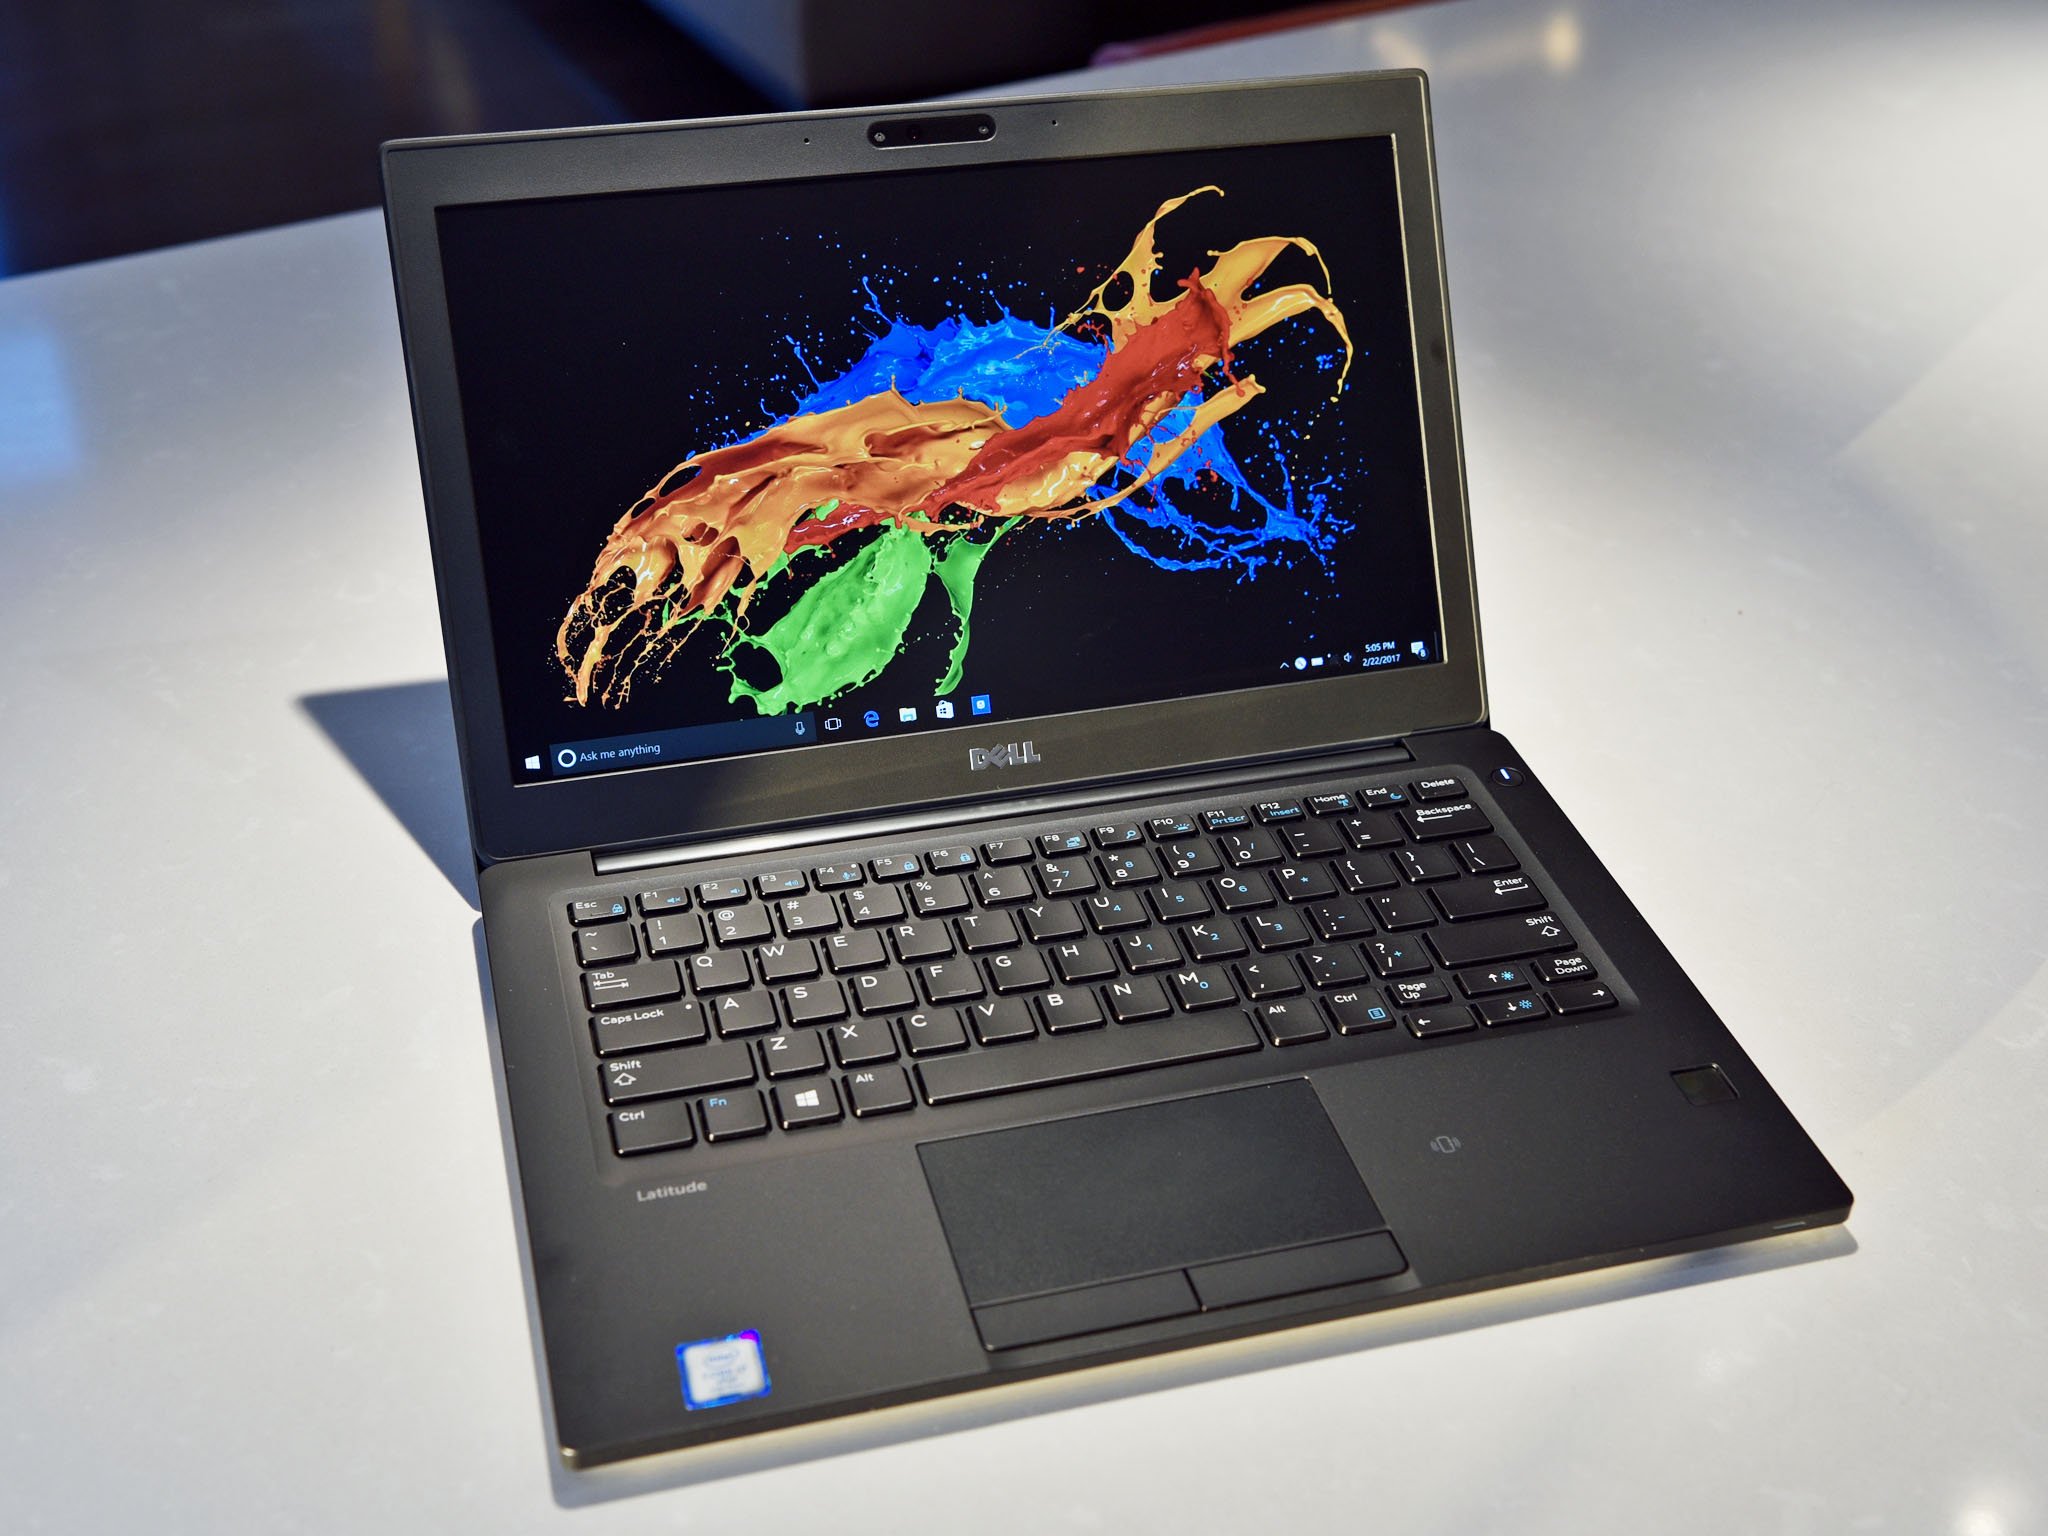 Dell Latitude 7280 review: A business laptop with consumer